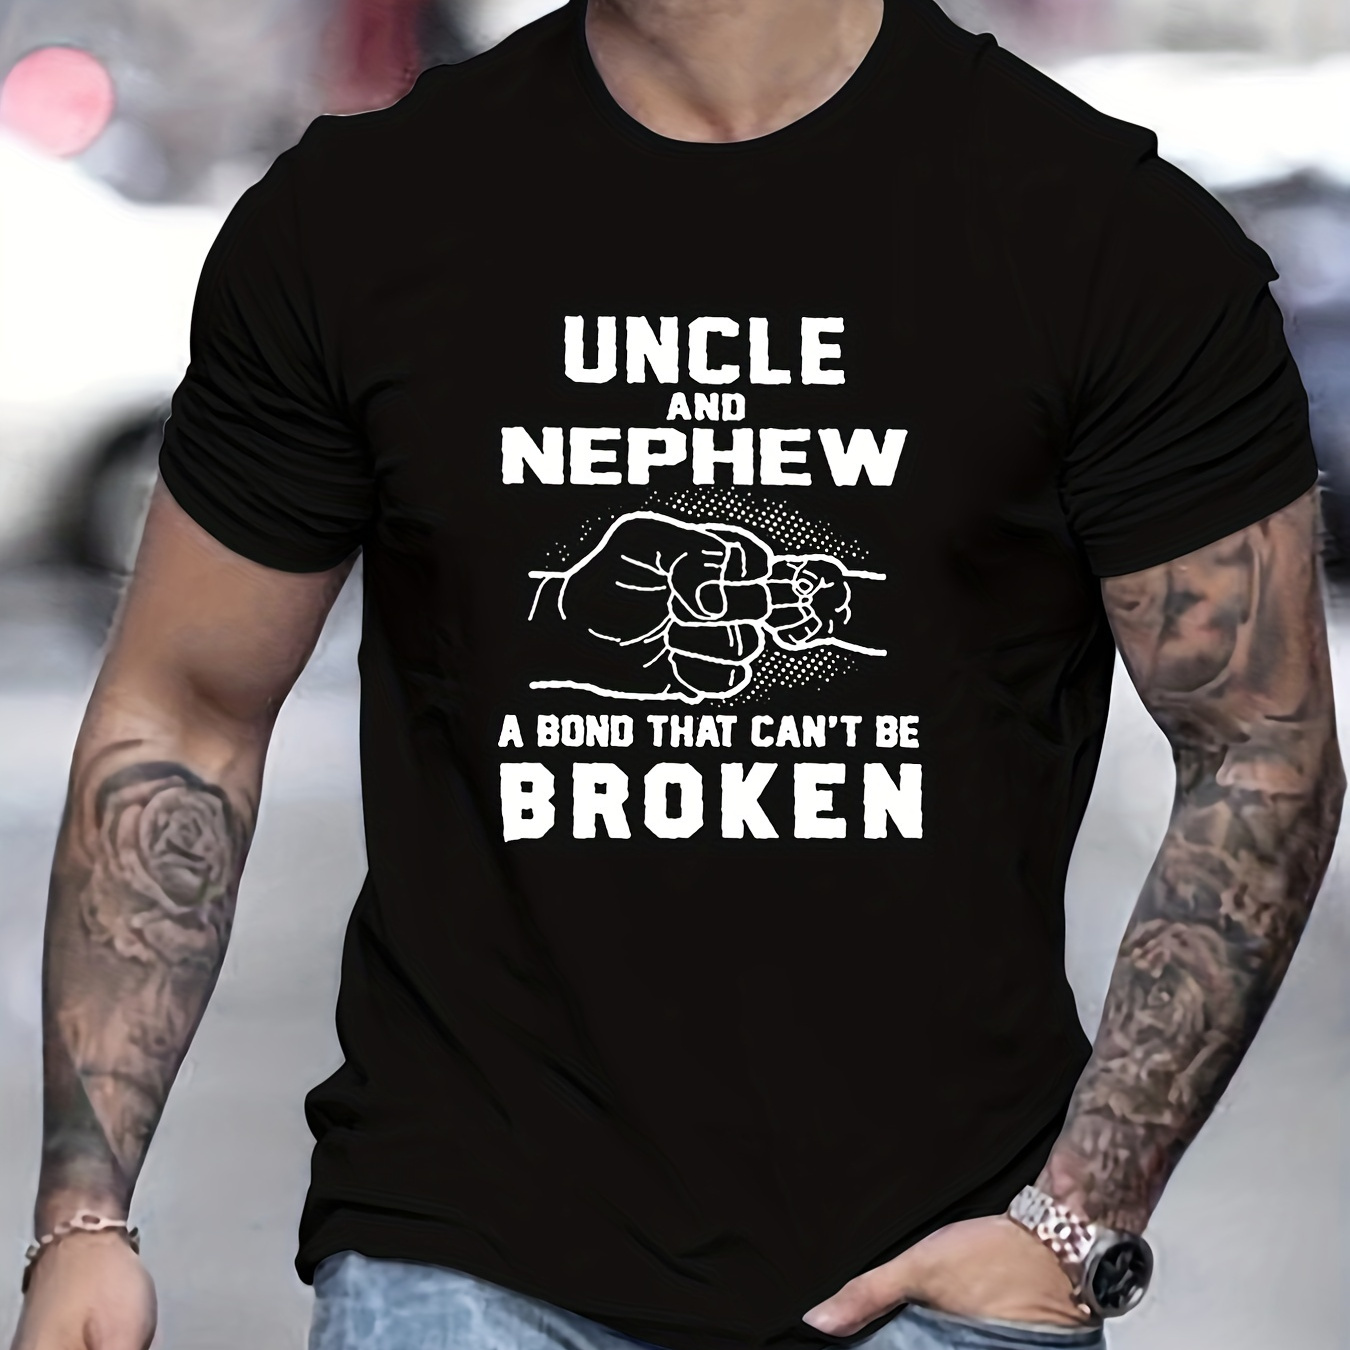 

Uncle & Nephew Letter Pattern Print Men's Comfy T-shirt, Graphic Tee Men's Summer Outdoor Clothes, Men's Clothing, Tops For Men, Gift For Men